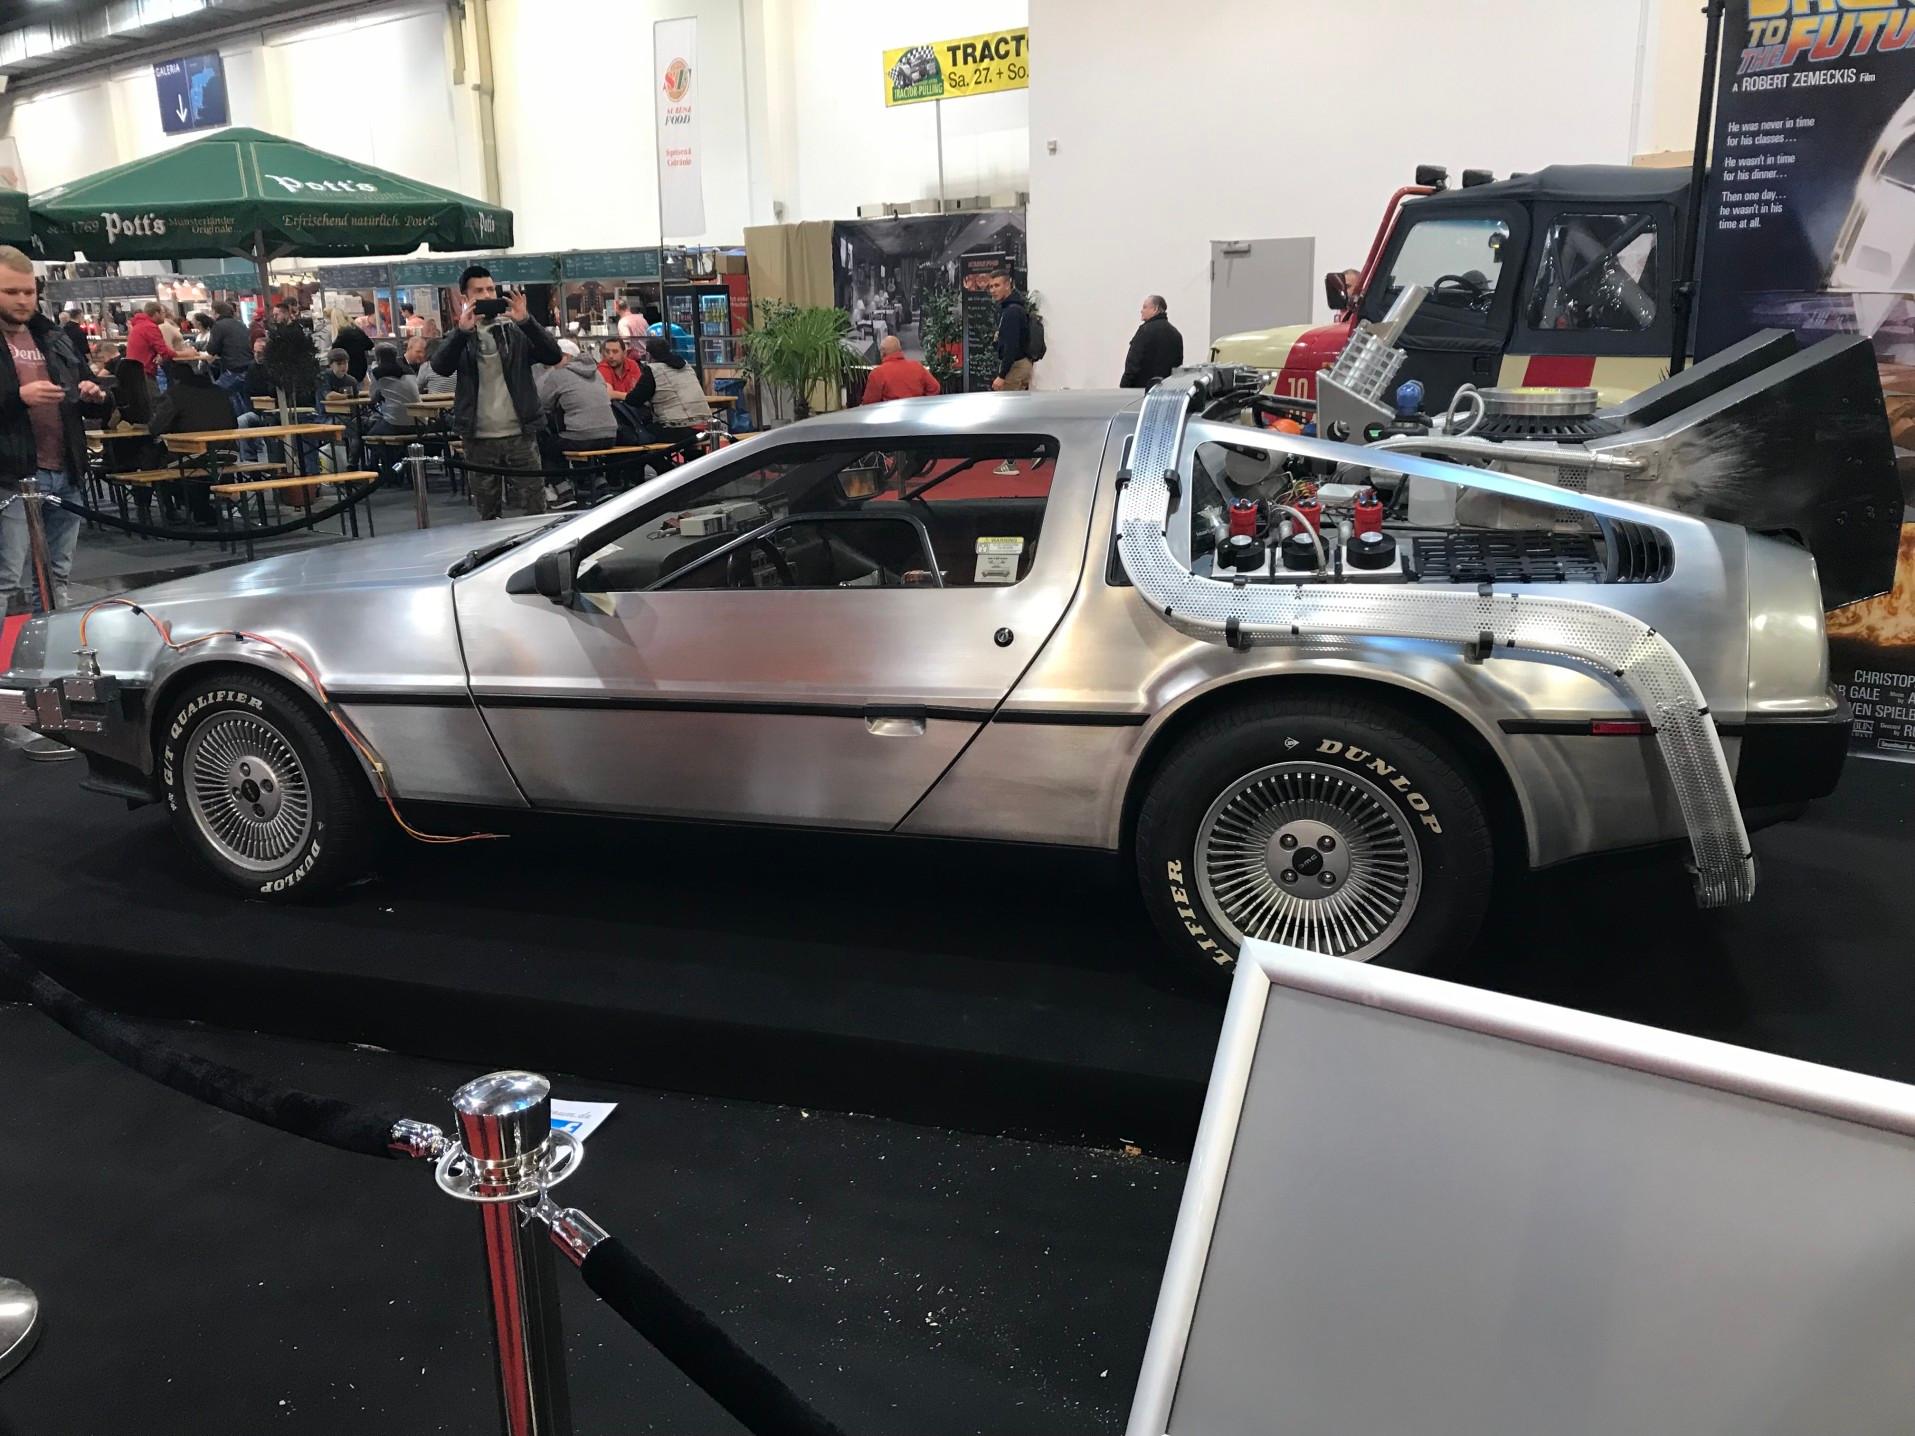 The DeLorean from ‘Back to the Future’ on display